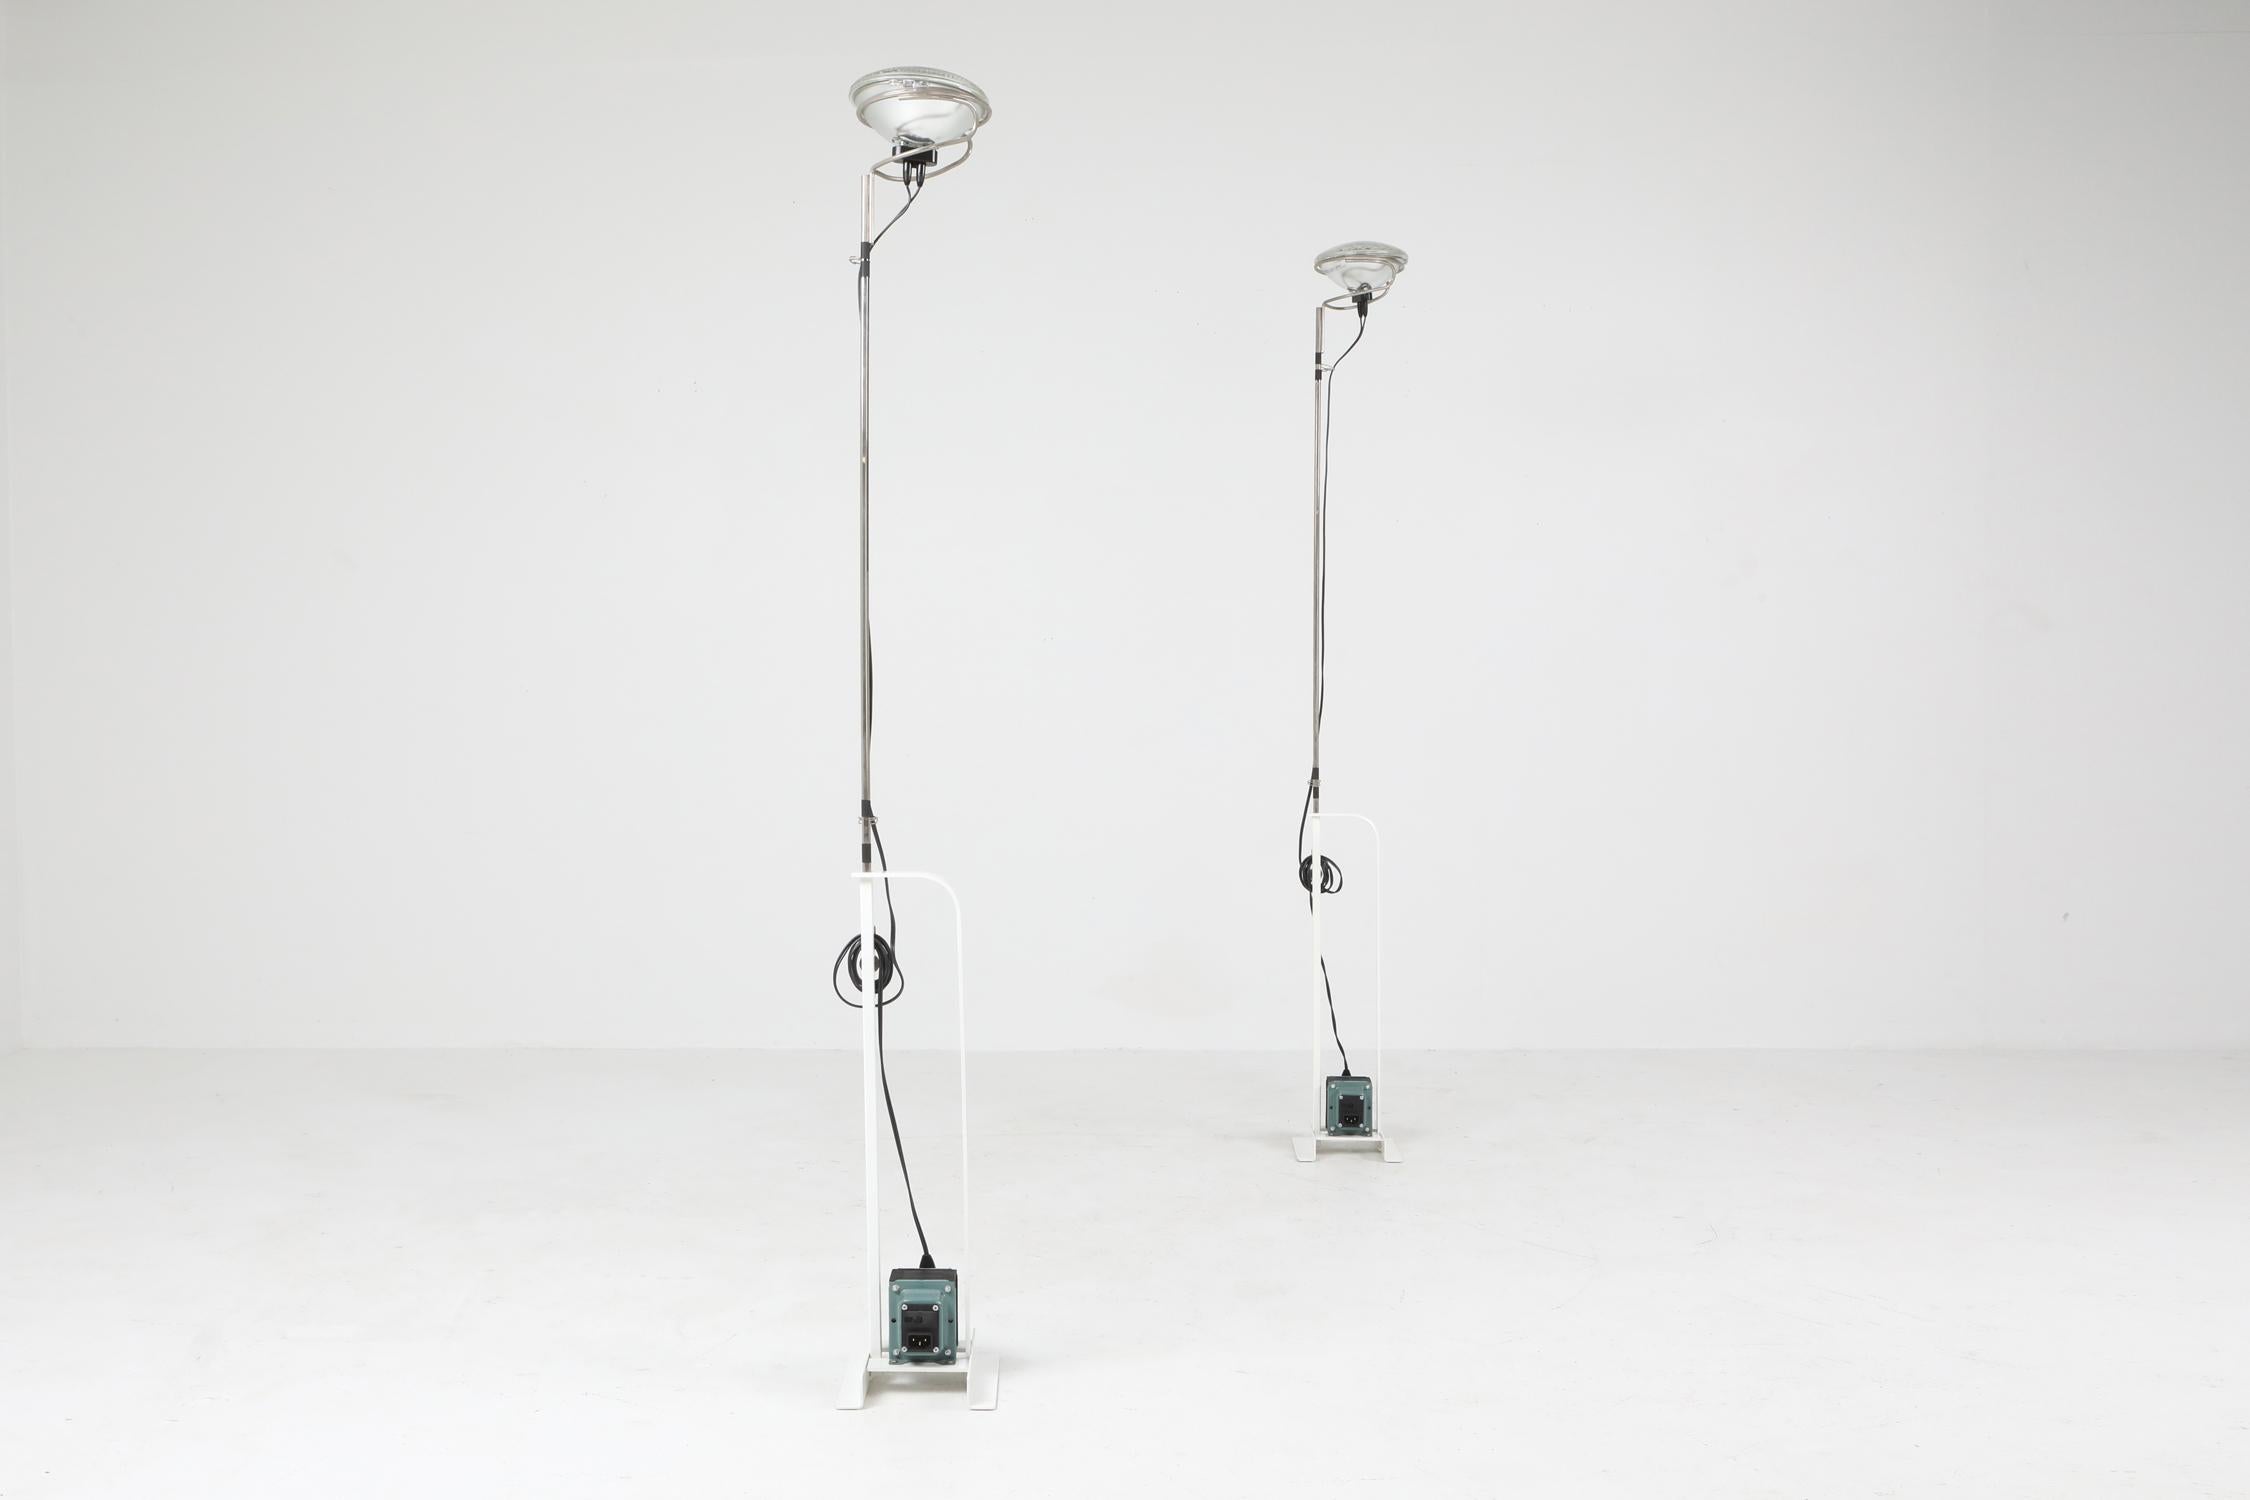 Flos Toio floor lamp in white. The designers Pier Giacomo and Achille Castiglion named it after the word thoy. This inventive lamp blends an Industrial style with a timeless and whimsical design.
This lamp has garnered awards and even earning a